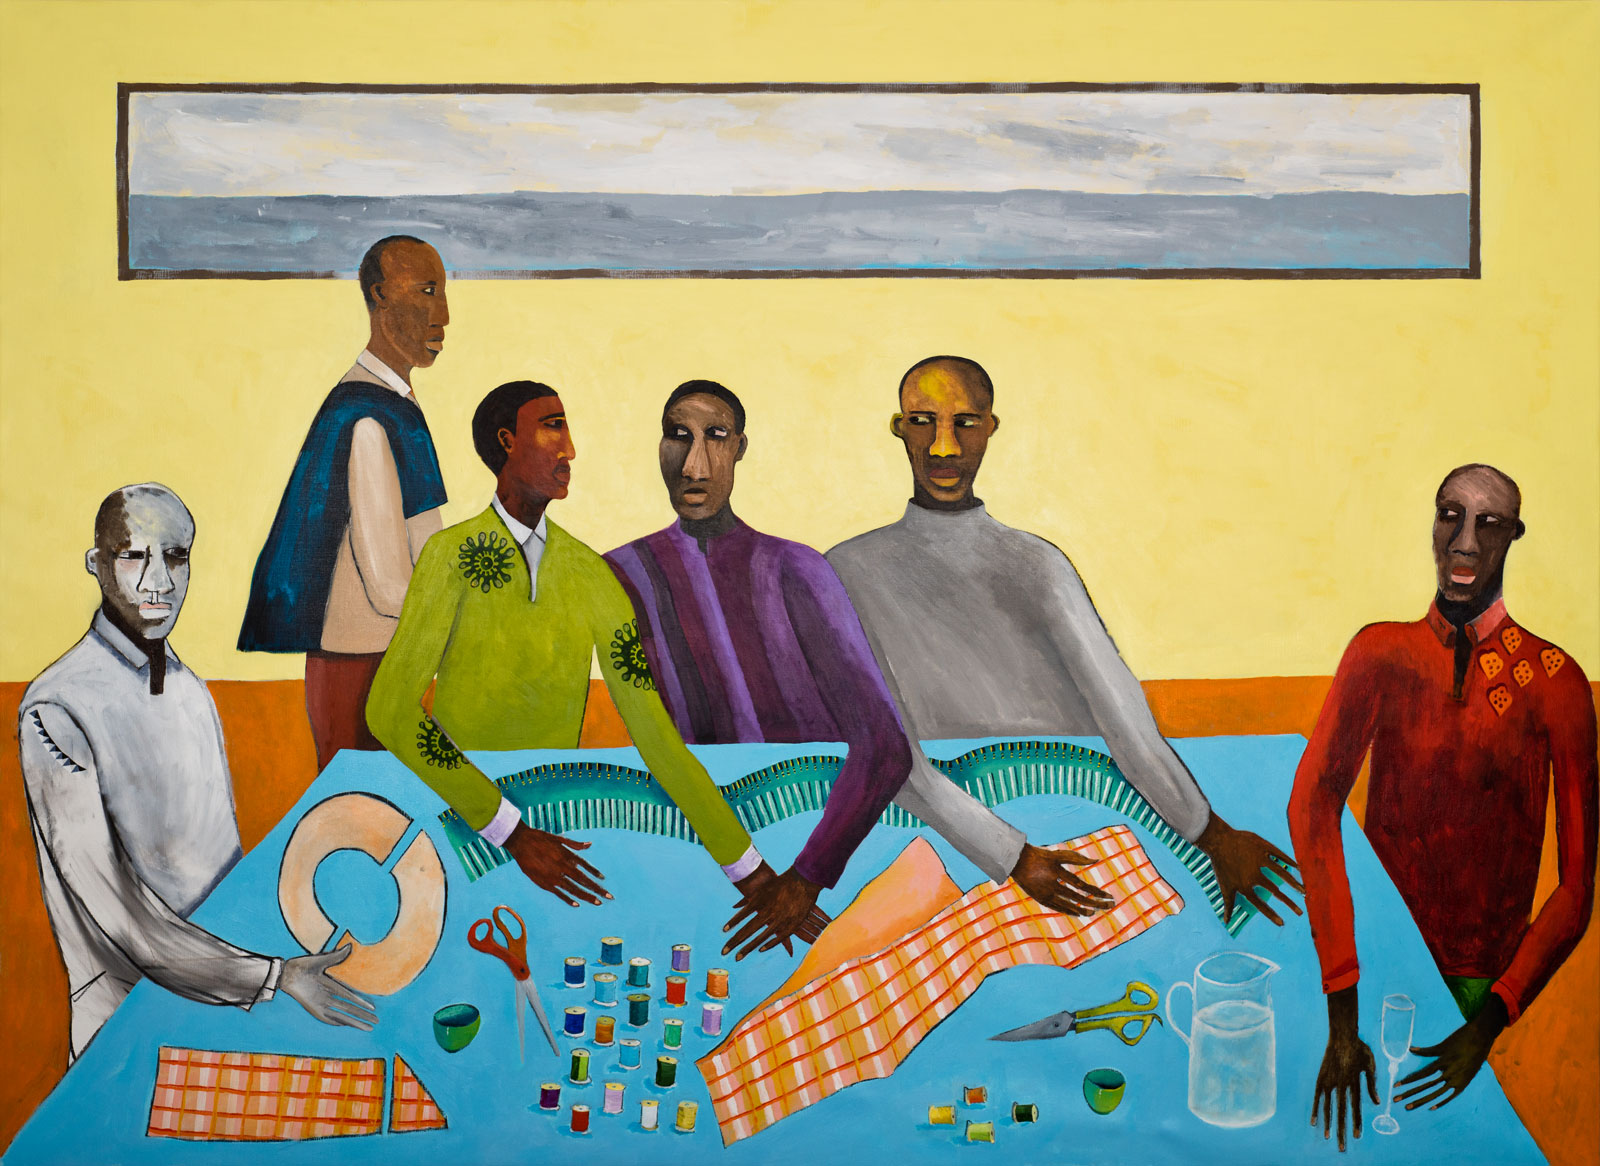 Lubaina Himid: Six Tailors, part of a diptych with Close Up – Materials for Change, 2019